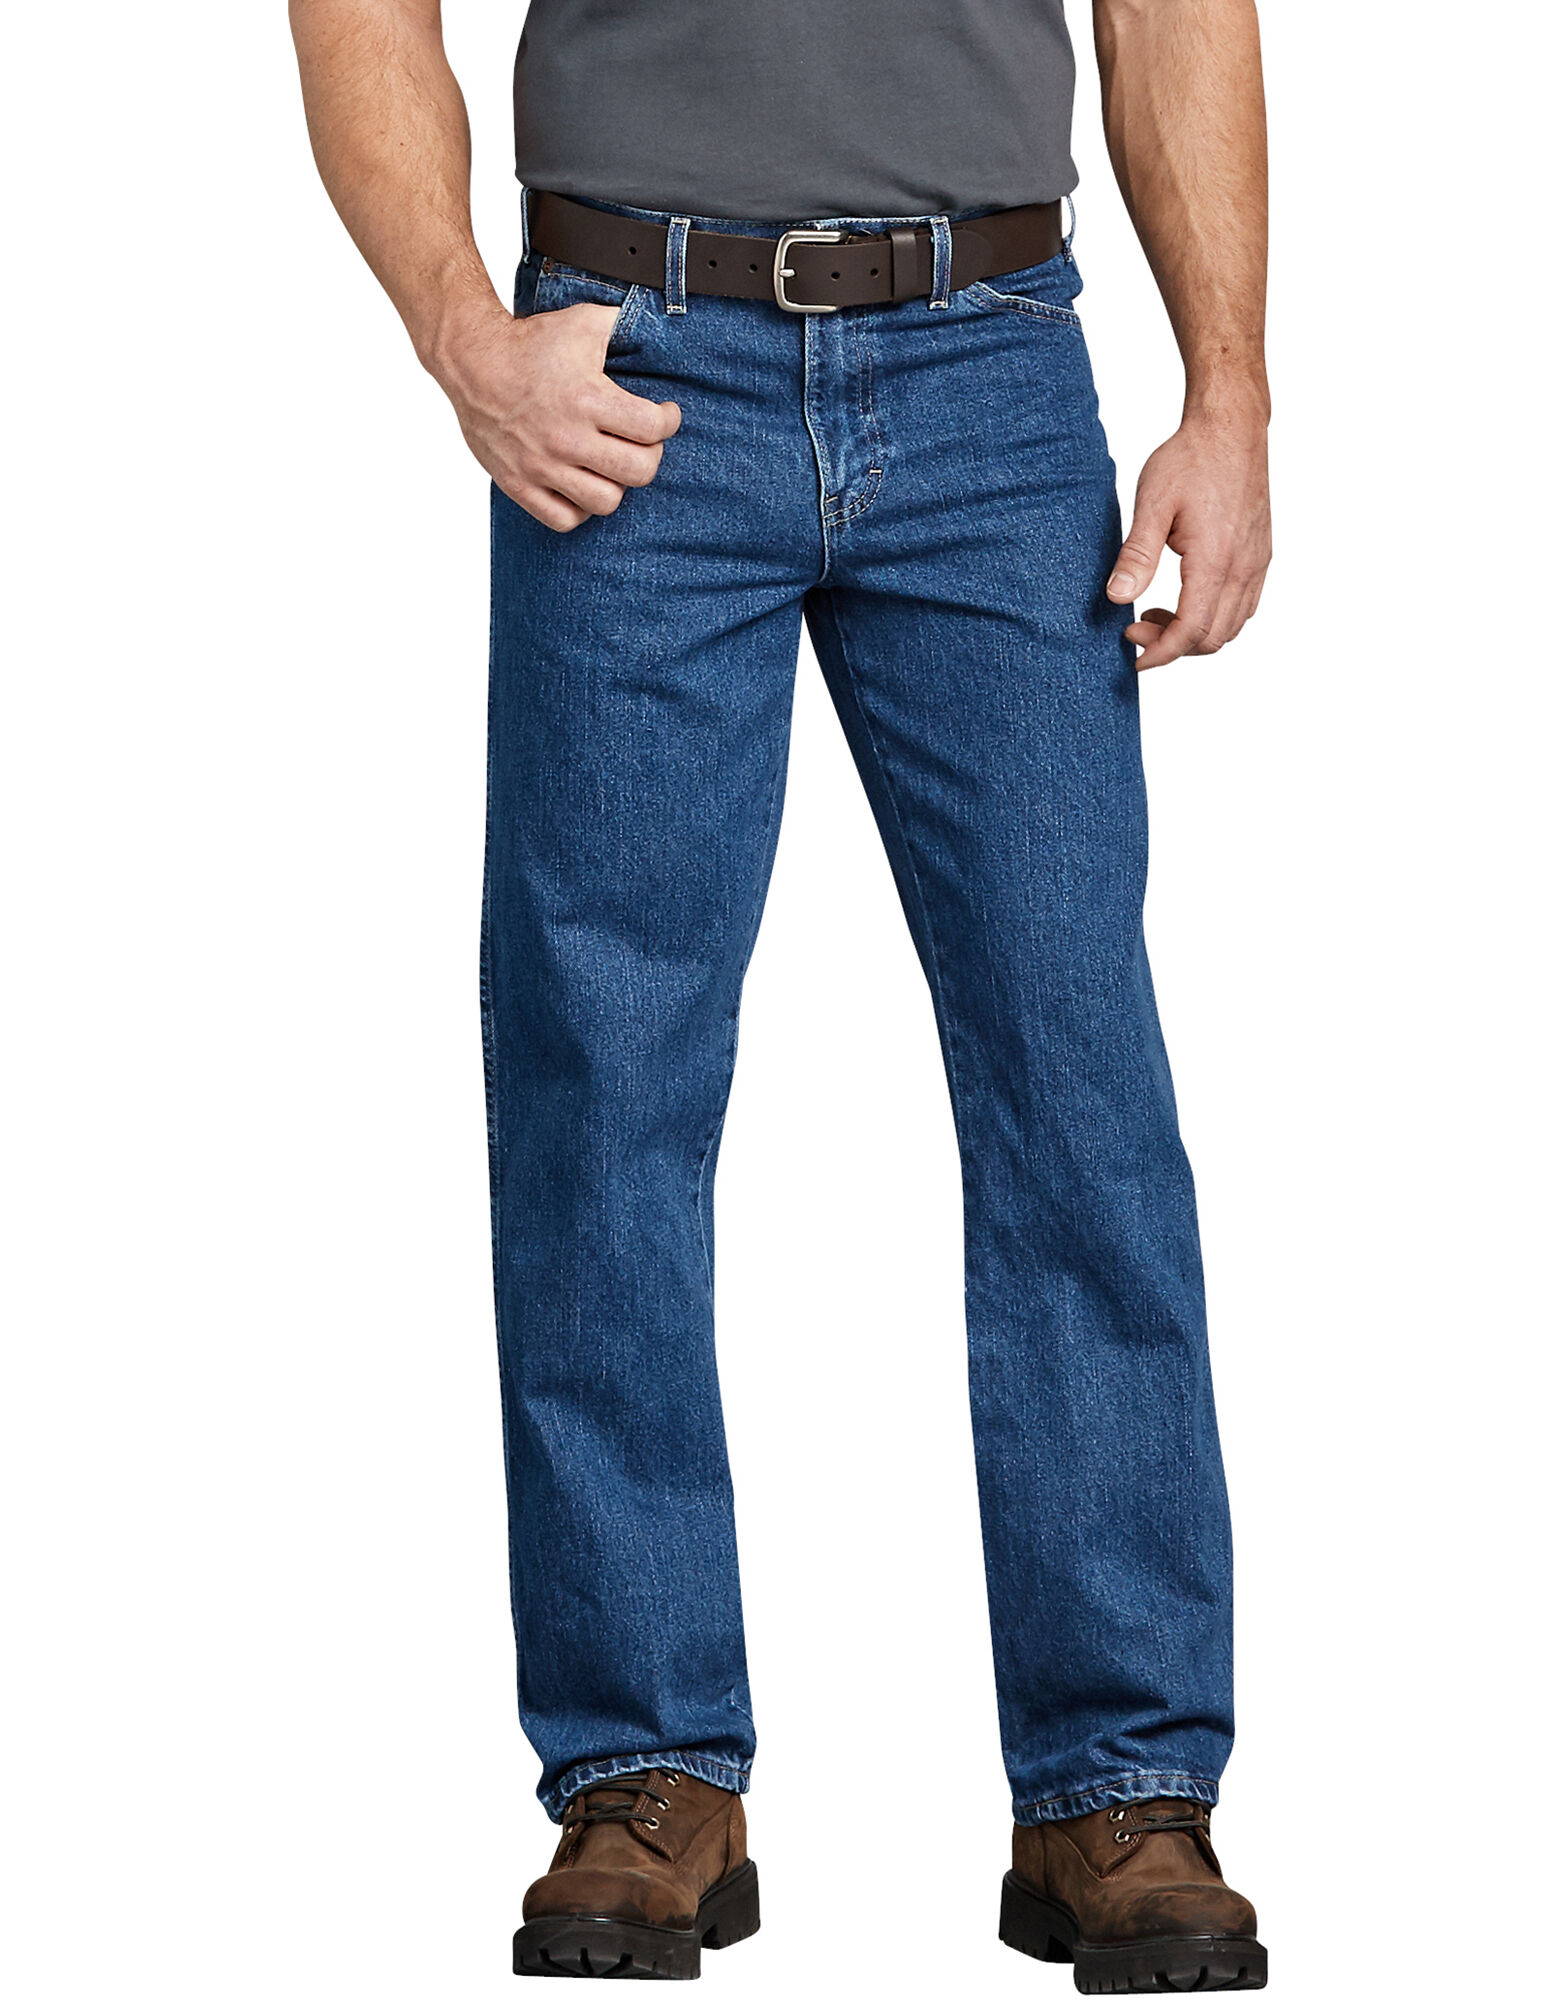 Rergular Fit Work Jeans | Dickes Canada